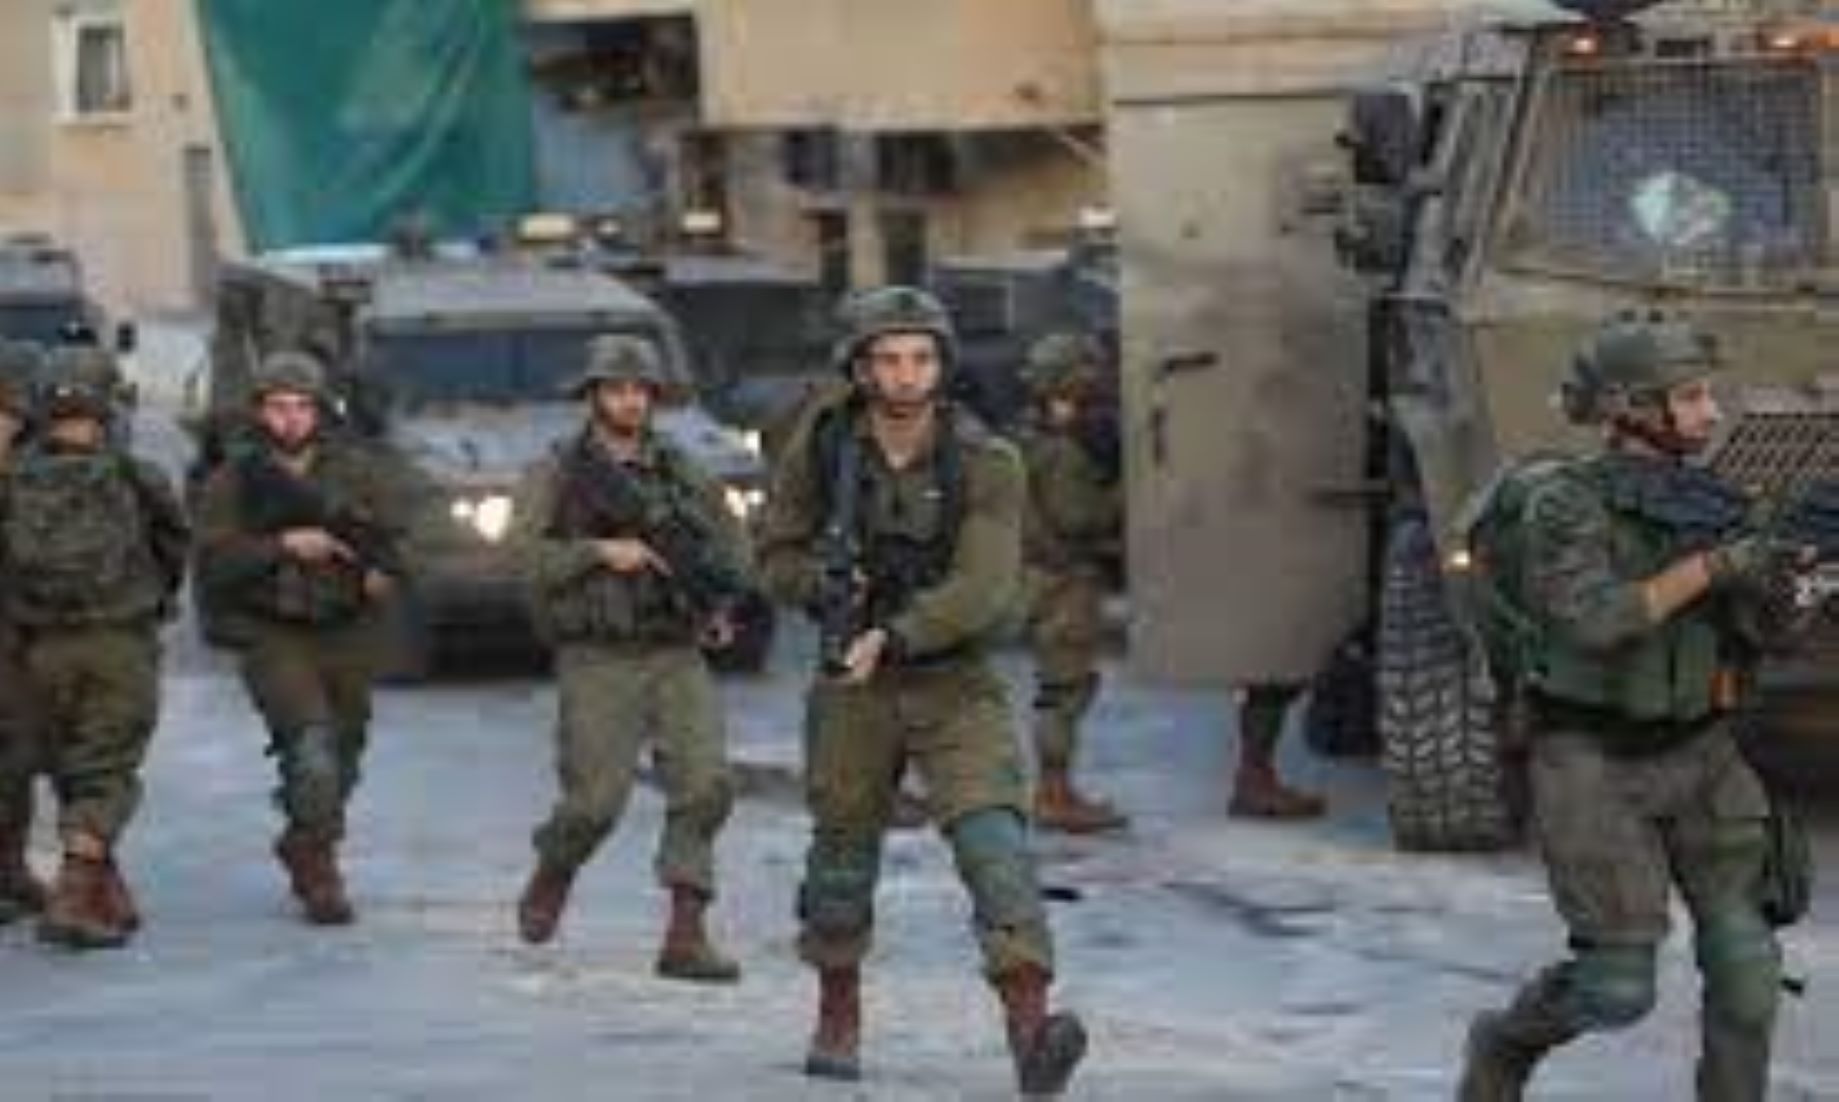 Two More Palestinians Killed In Northern West Bank: Medics